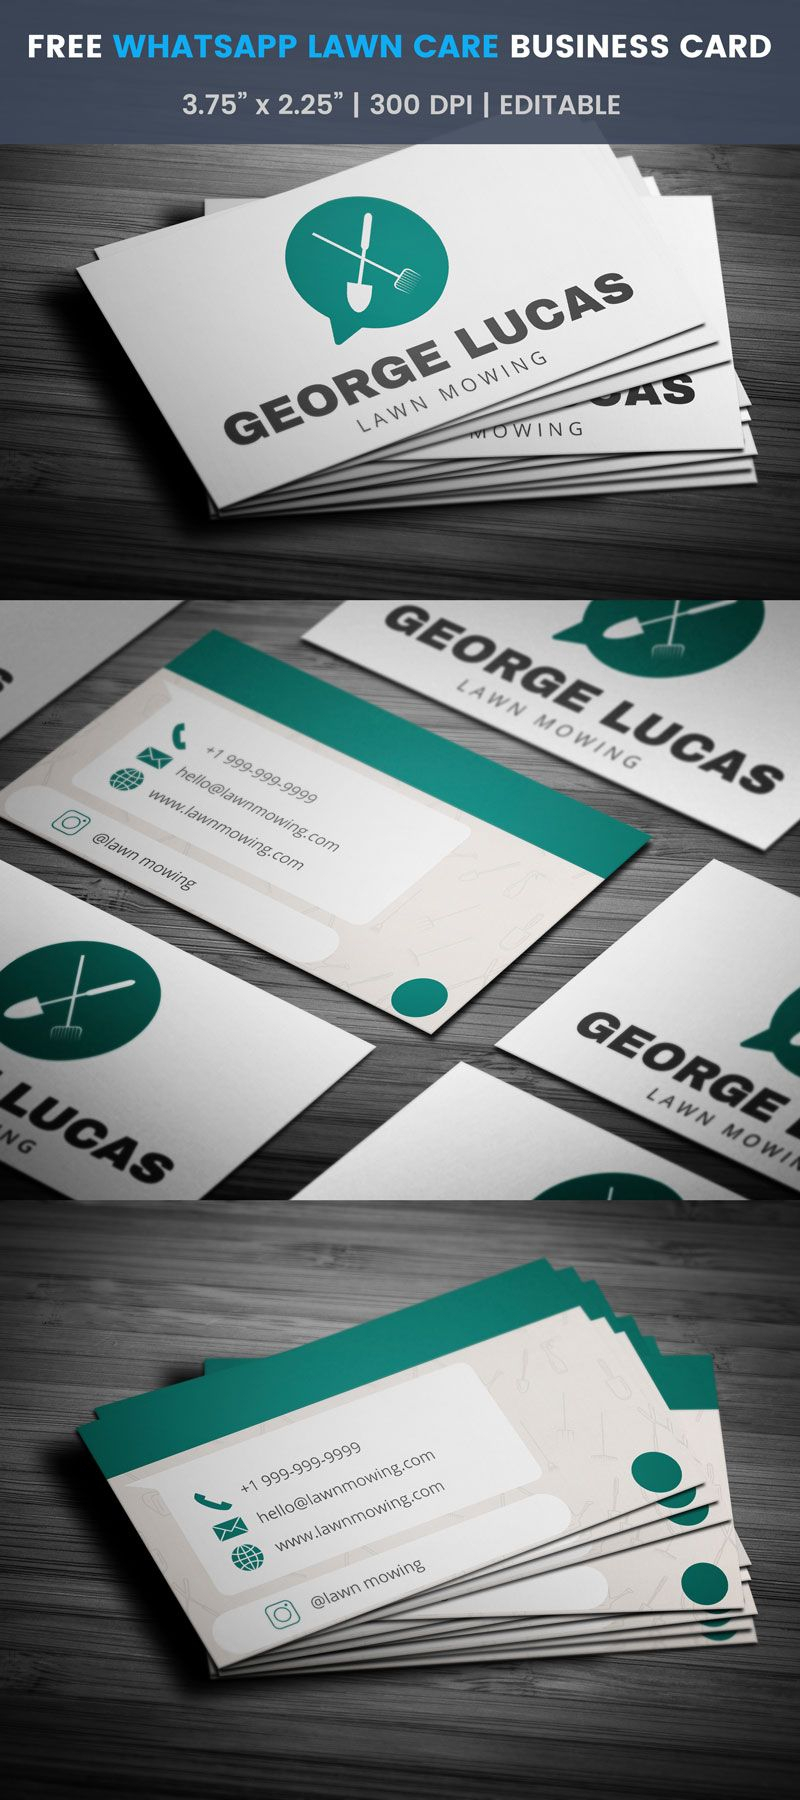 Whatsapp Themed Lawn Care Business Card – Full Preview Within Lawn Care Business Cards Templates Free